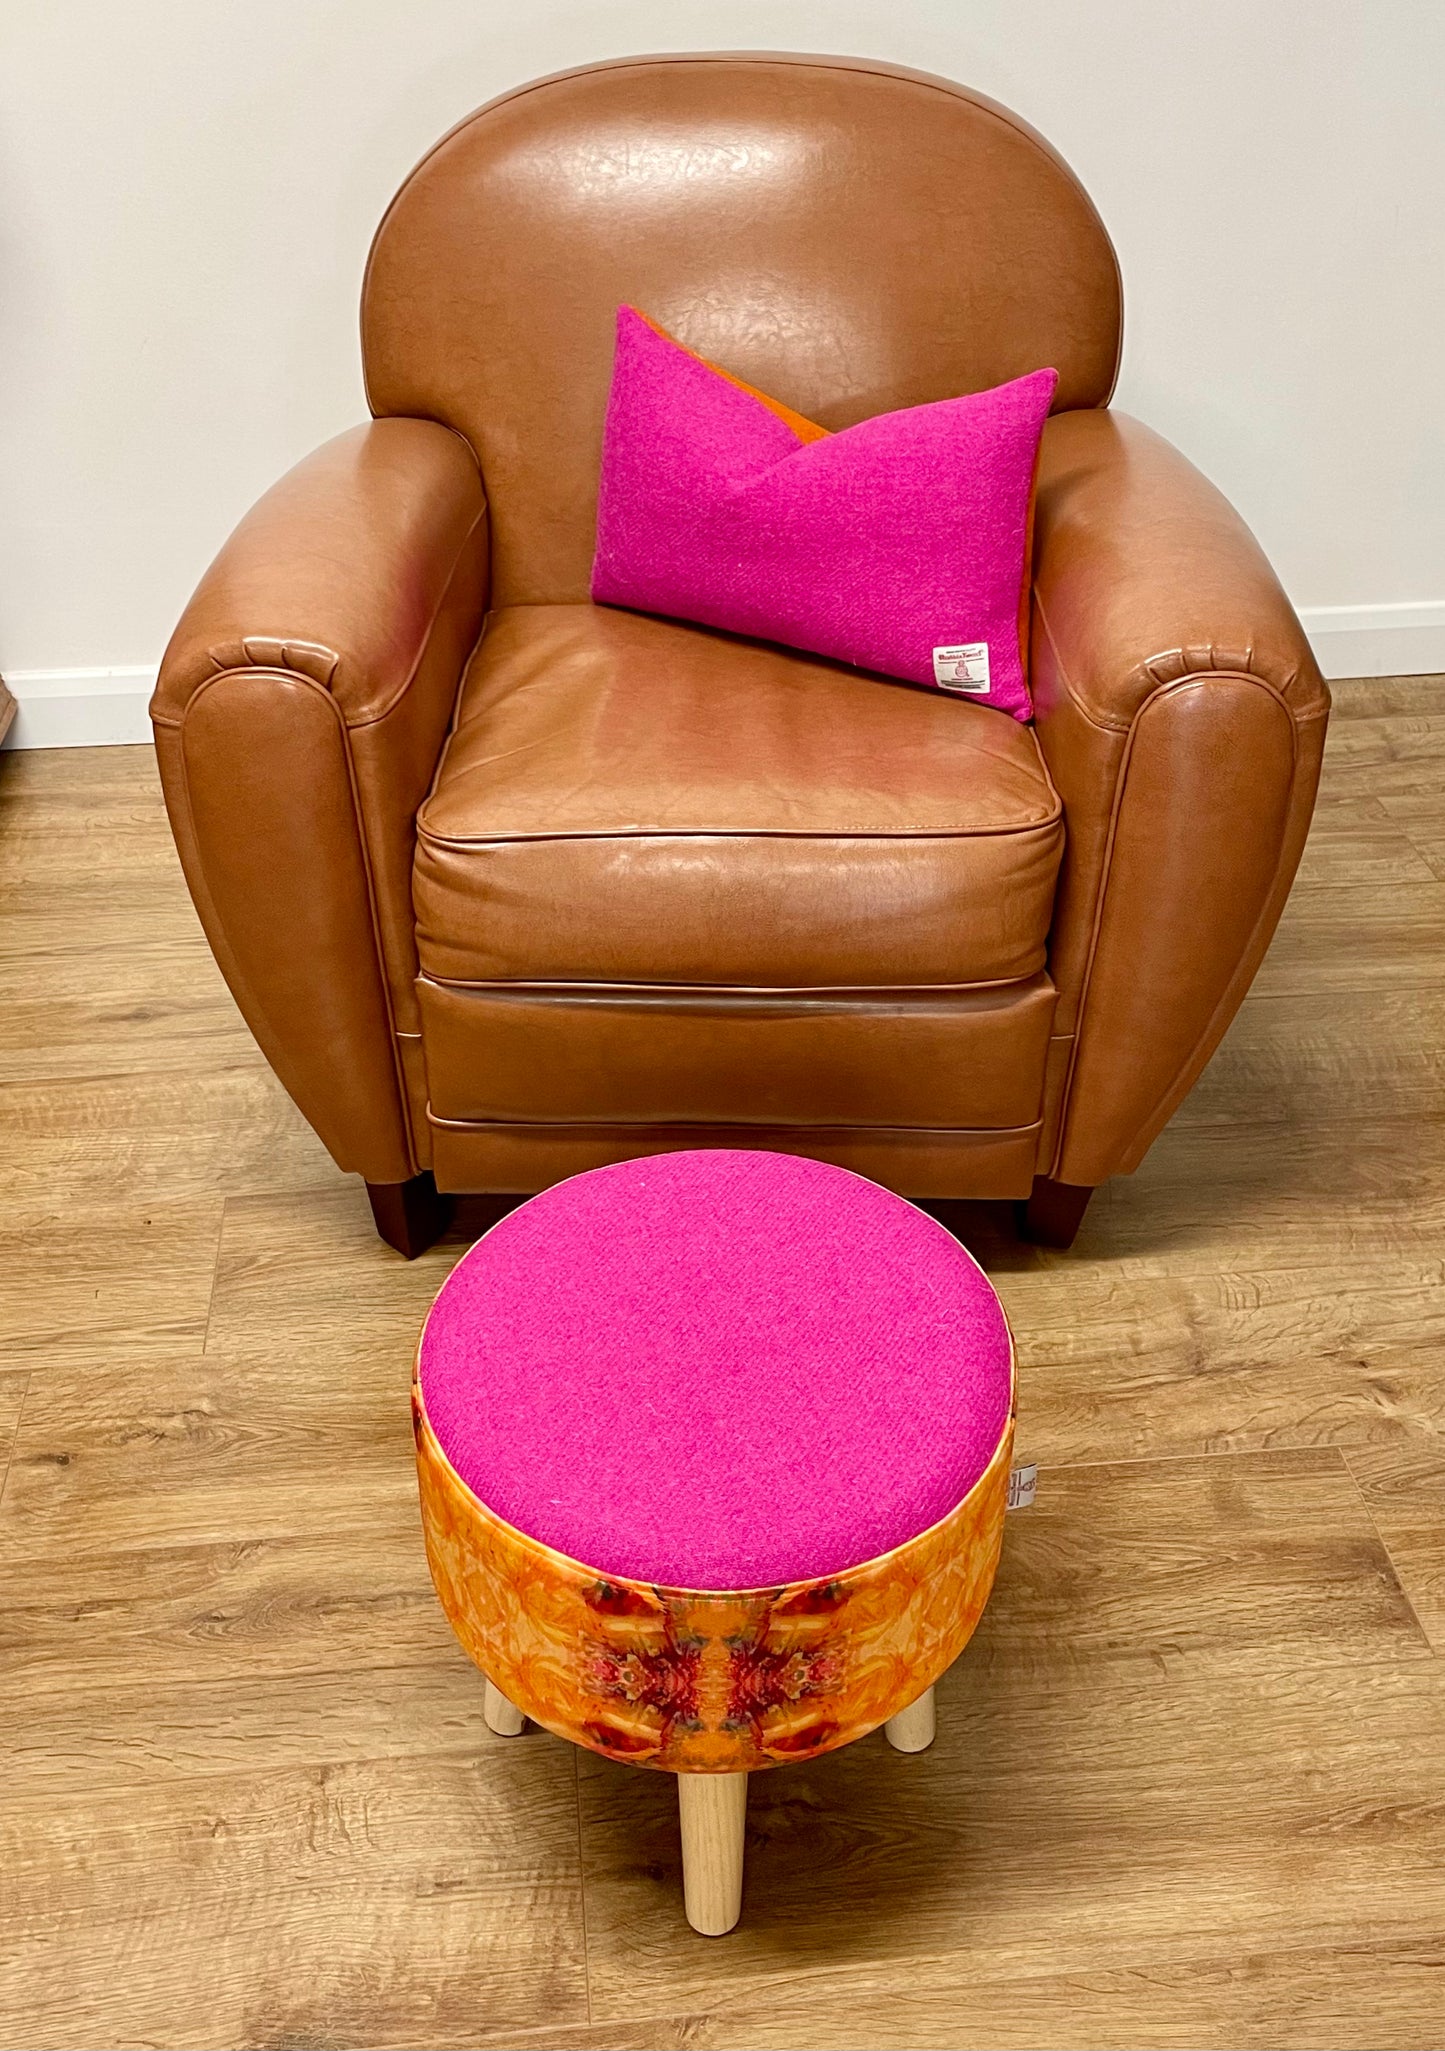 Fire Velvet and Bright Pink Harris Tweed Upholstered Footstool with Light Rustic Wooden Legs.